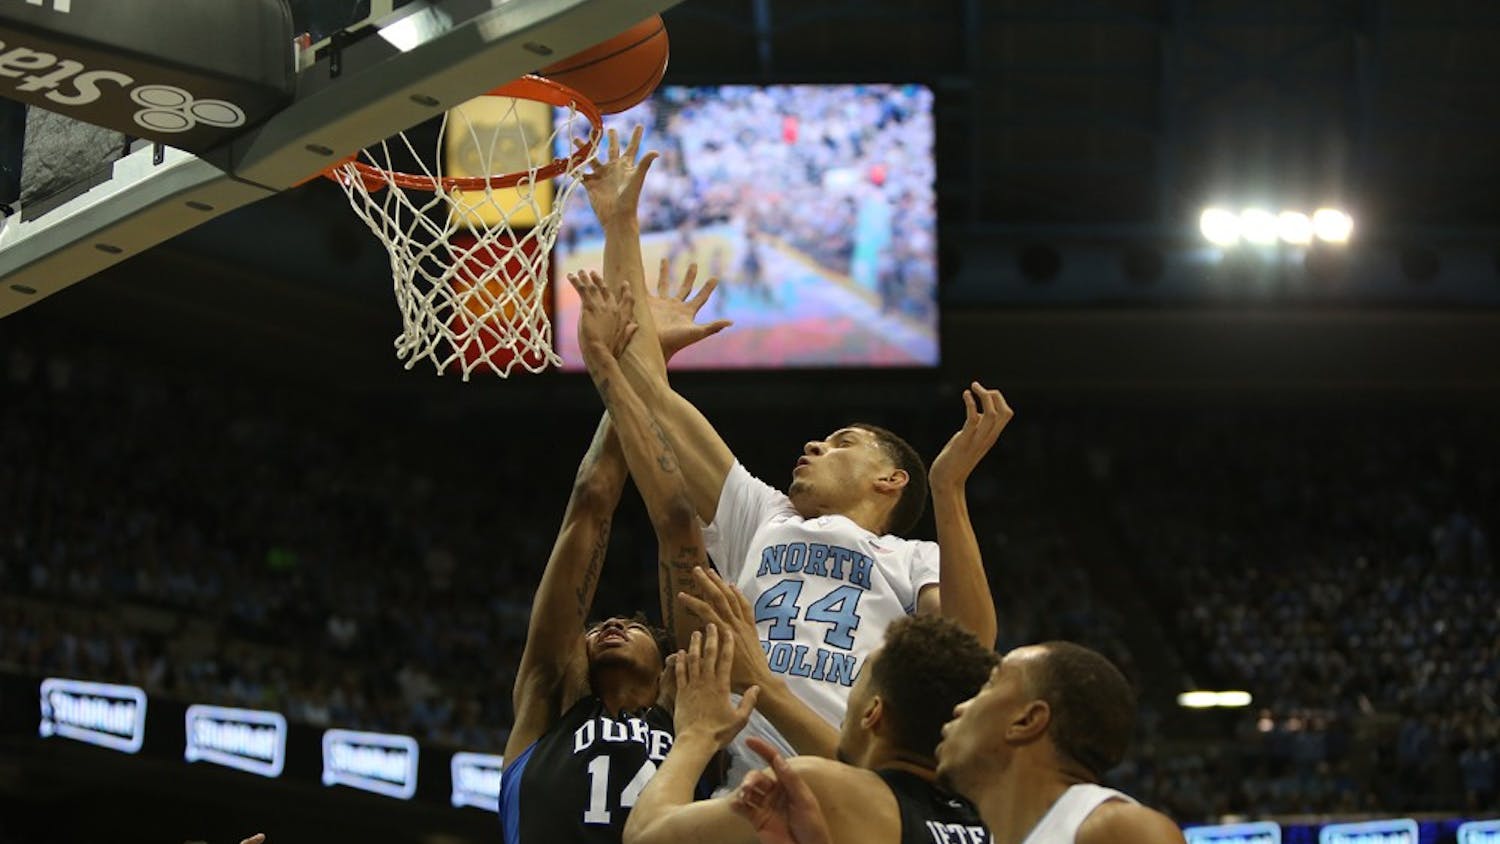 The UNC men's basketball team lost to Duke in the Dean Dome on Wednesday evening.